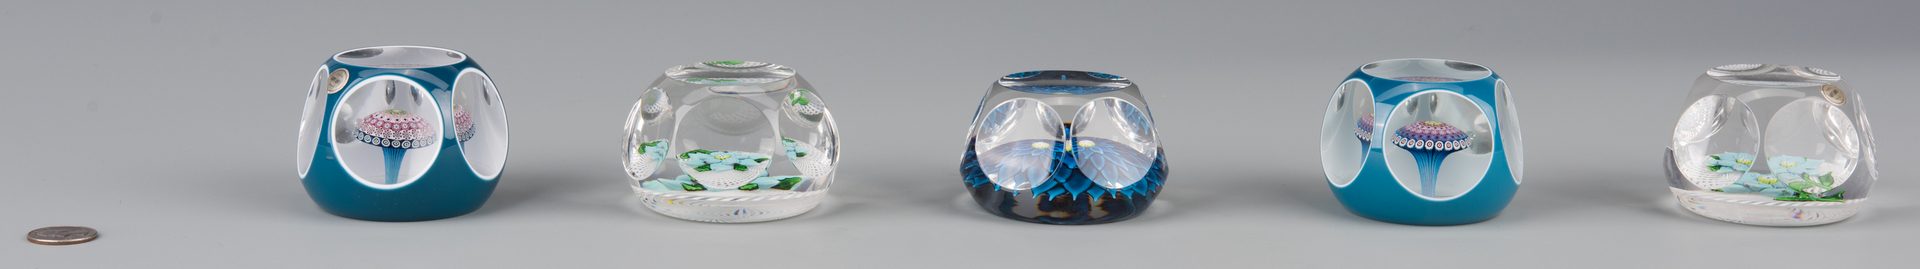 Lot 683: 9 St. Louis (France) Paperweights